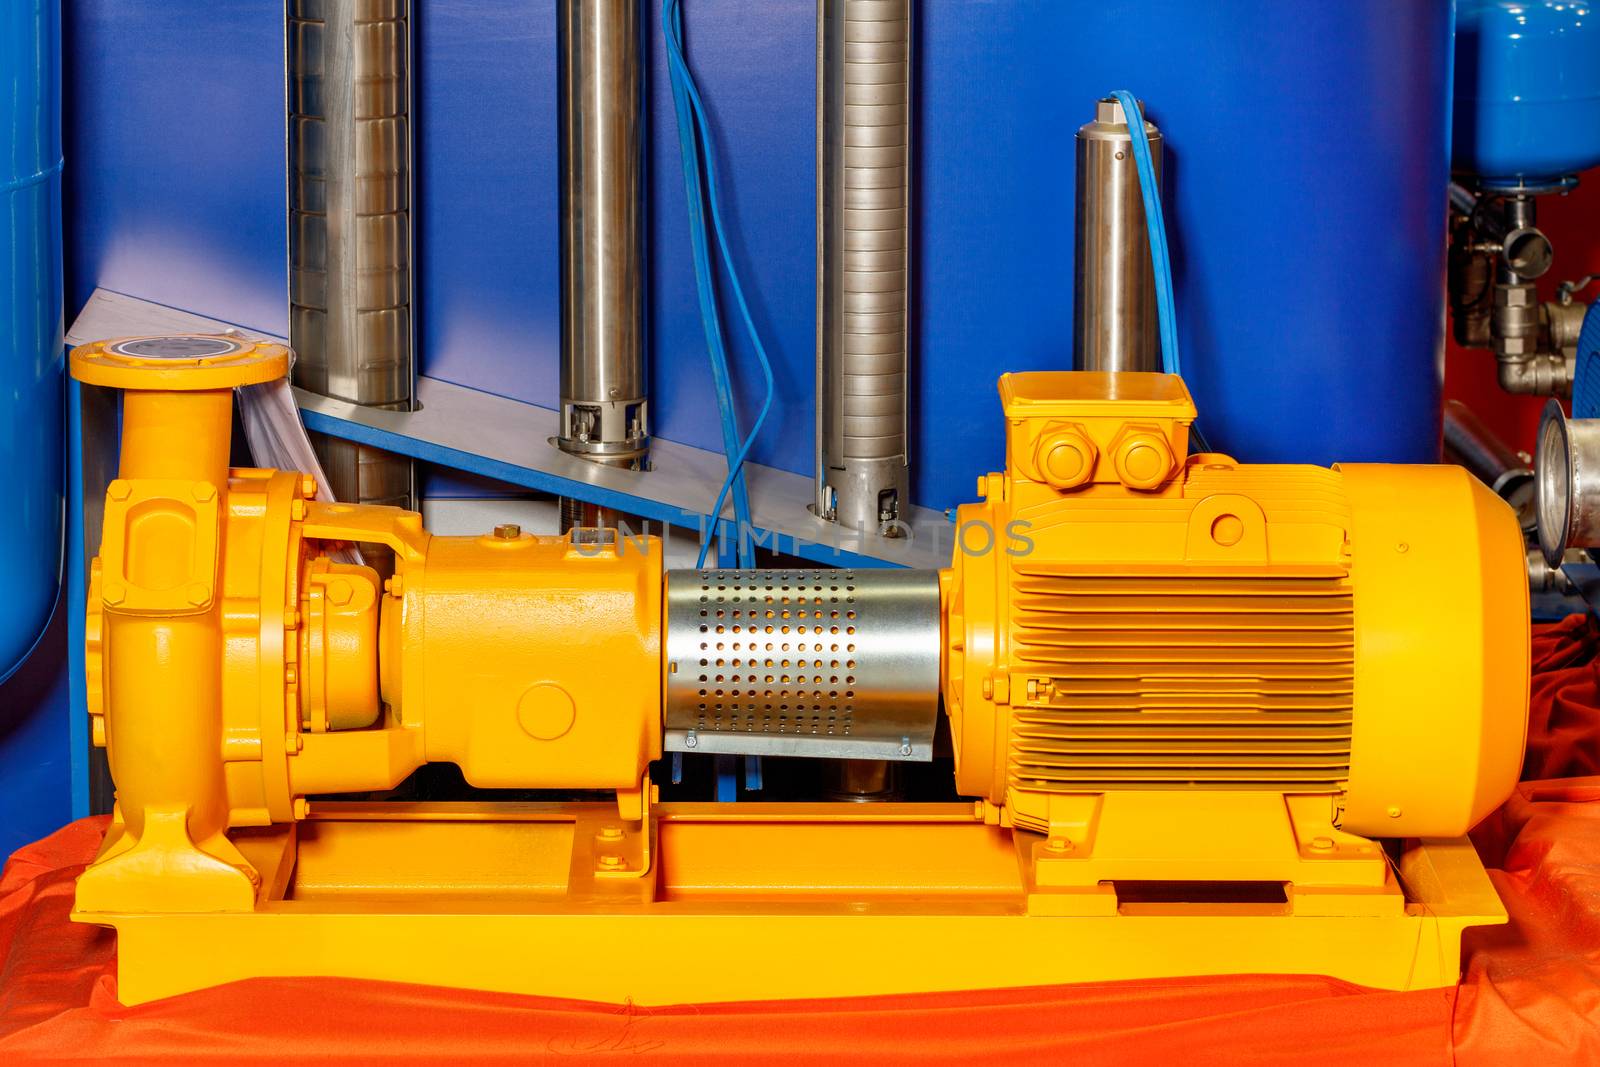 Industrial pumping equipment, stationary type electric powerful yellow sewage pump at the exhibition stand.